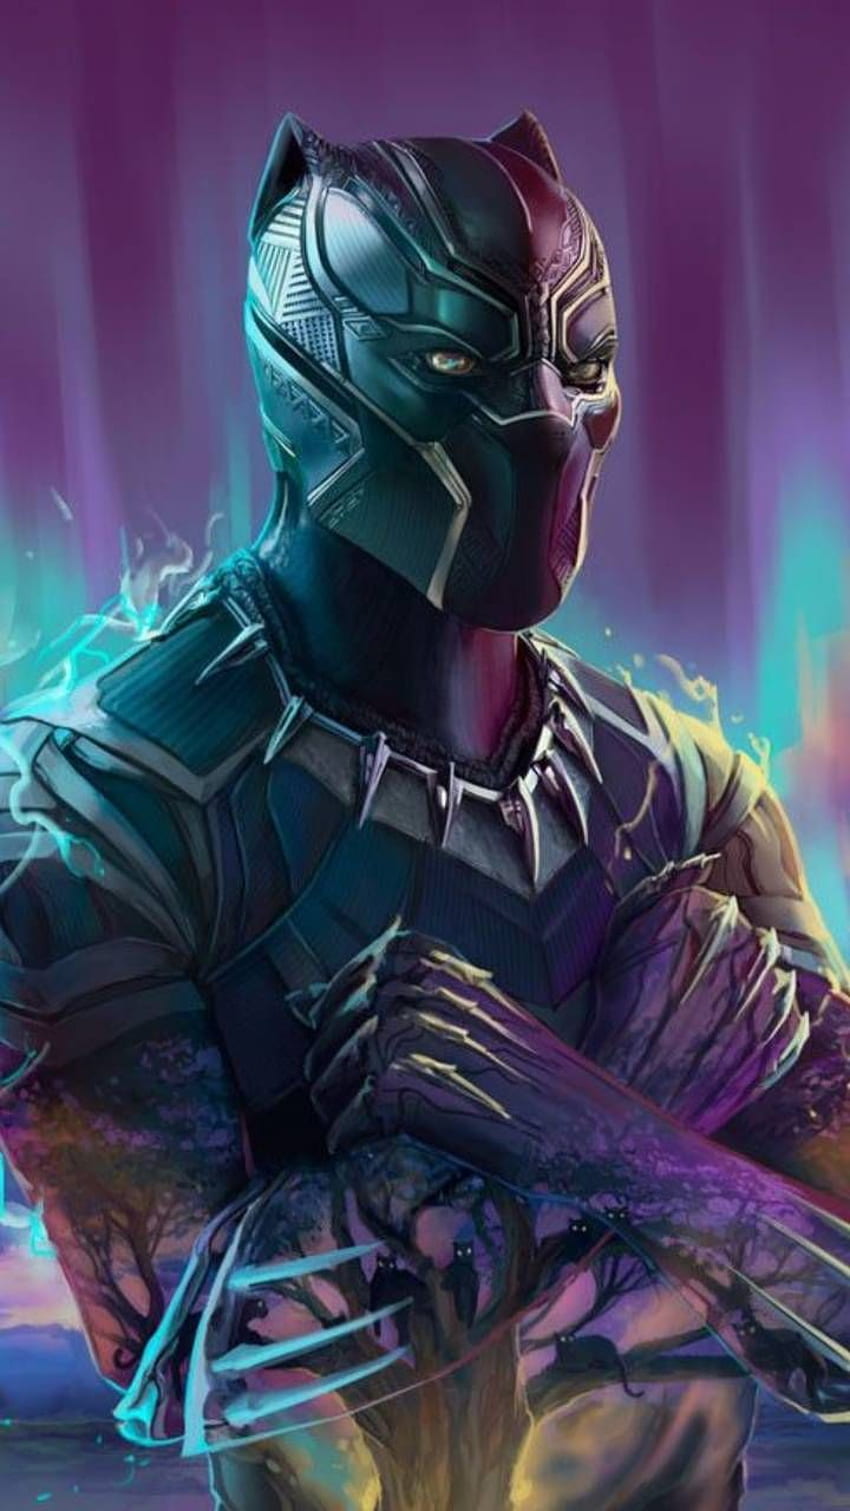 Download Edge black panther wallpaper by Samart04  6f  Free on ZEDGE  now Browse millions of popular black panthe  Spiderman pictures Black  panther Wallpaper